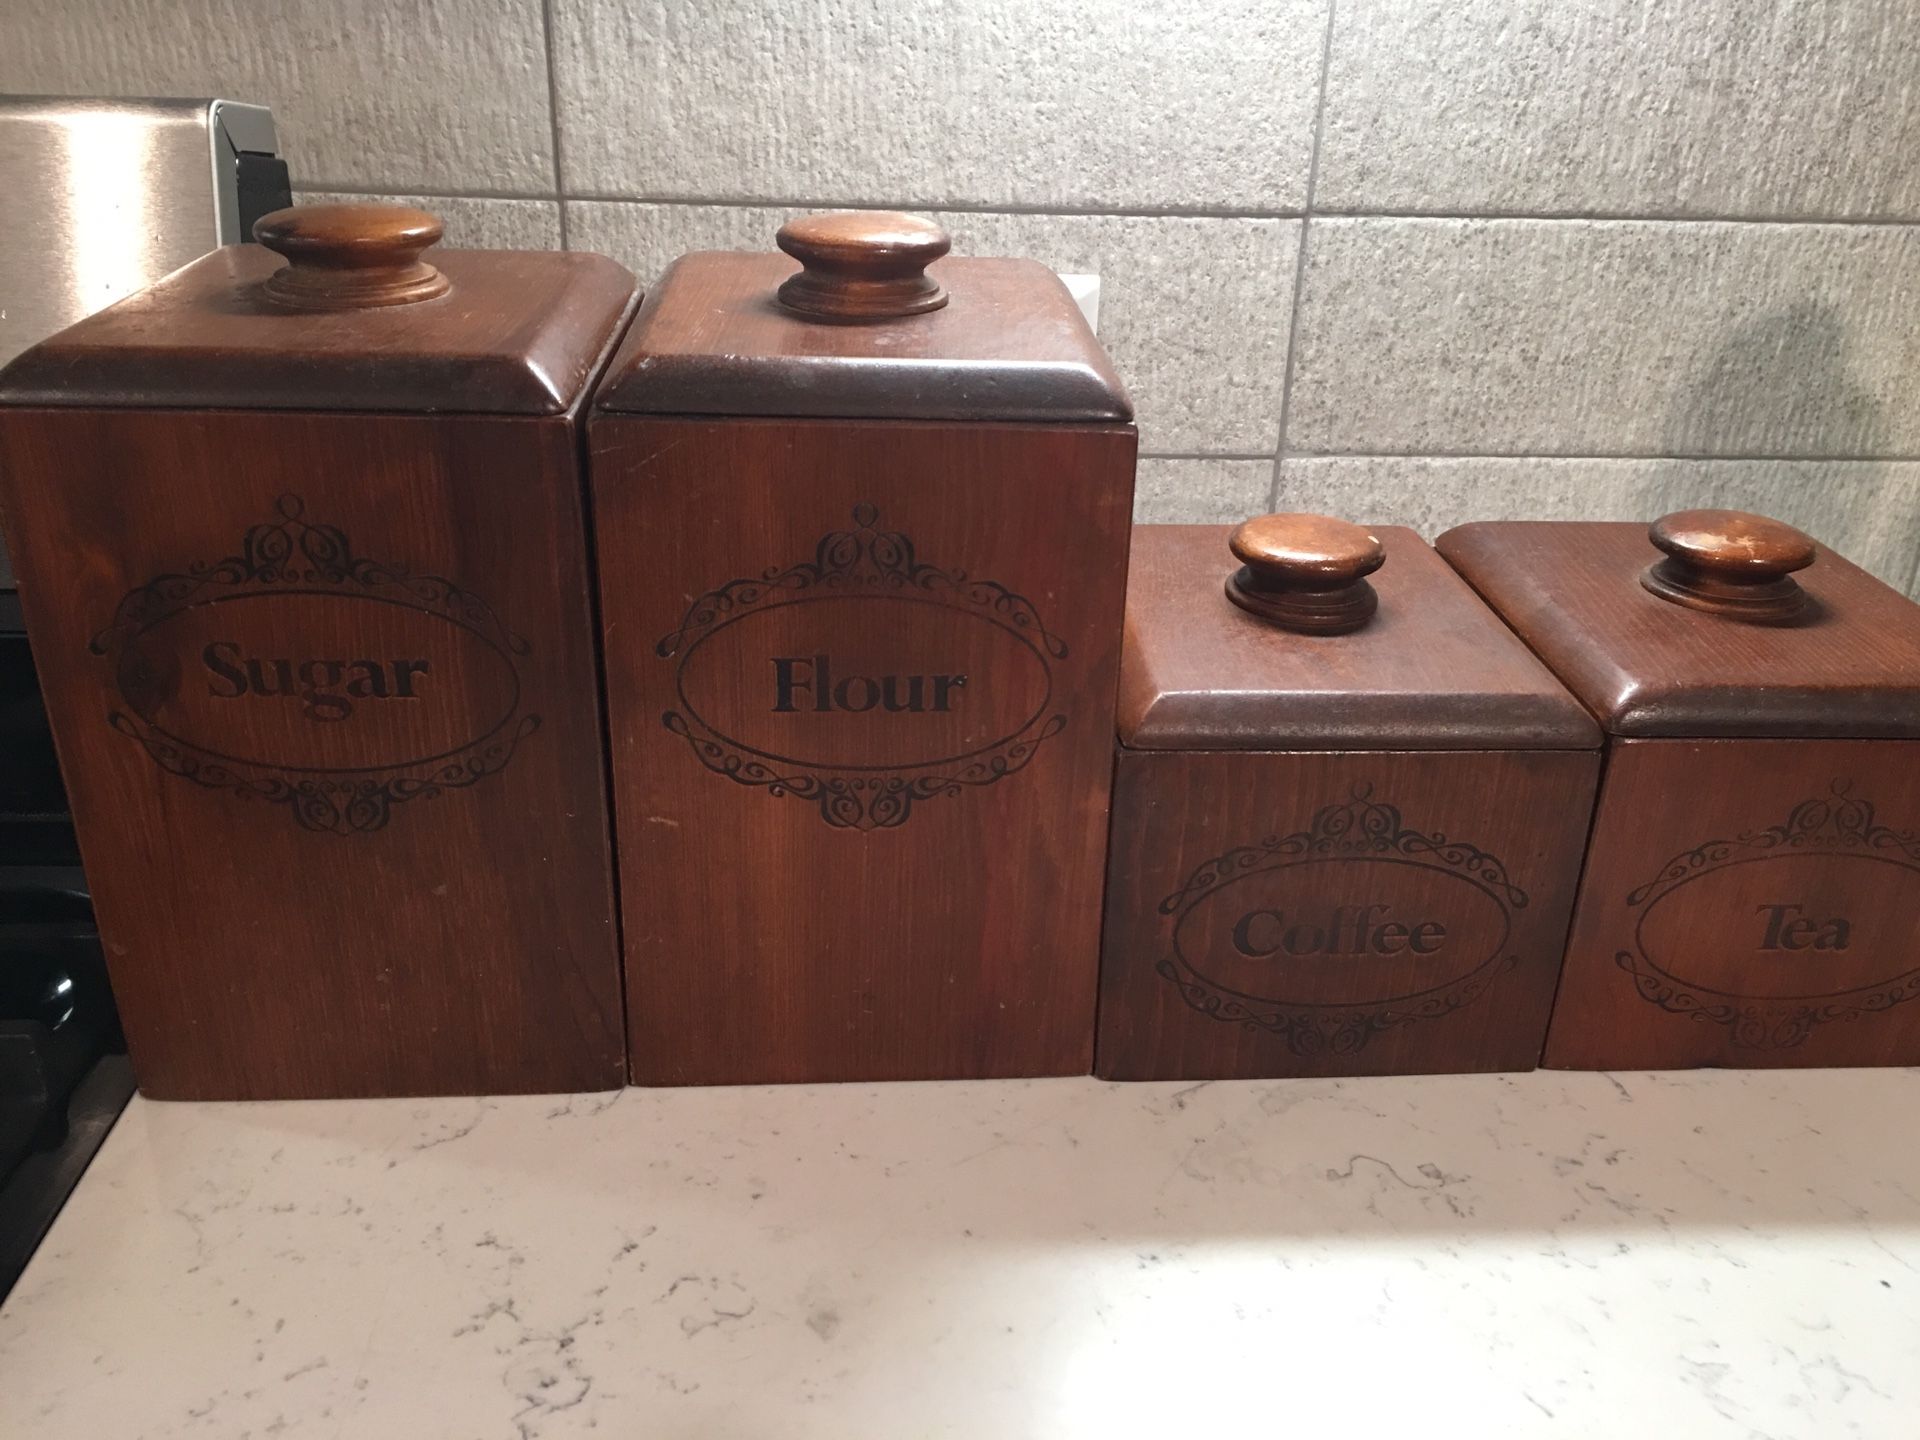 Vintage Kitchen Canisters - Containers - Organizers